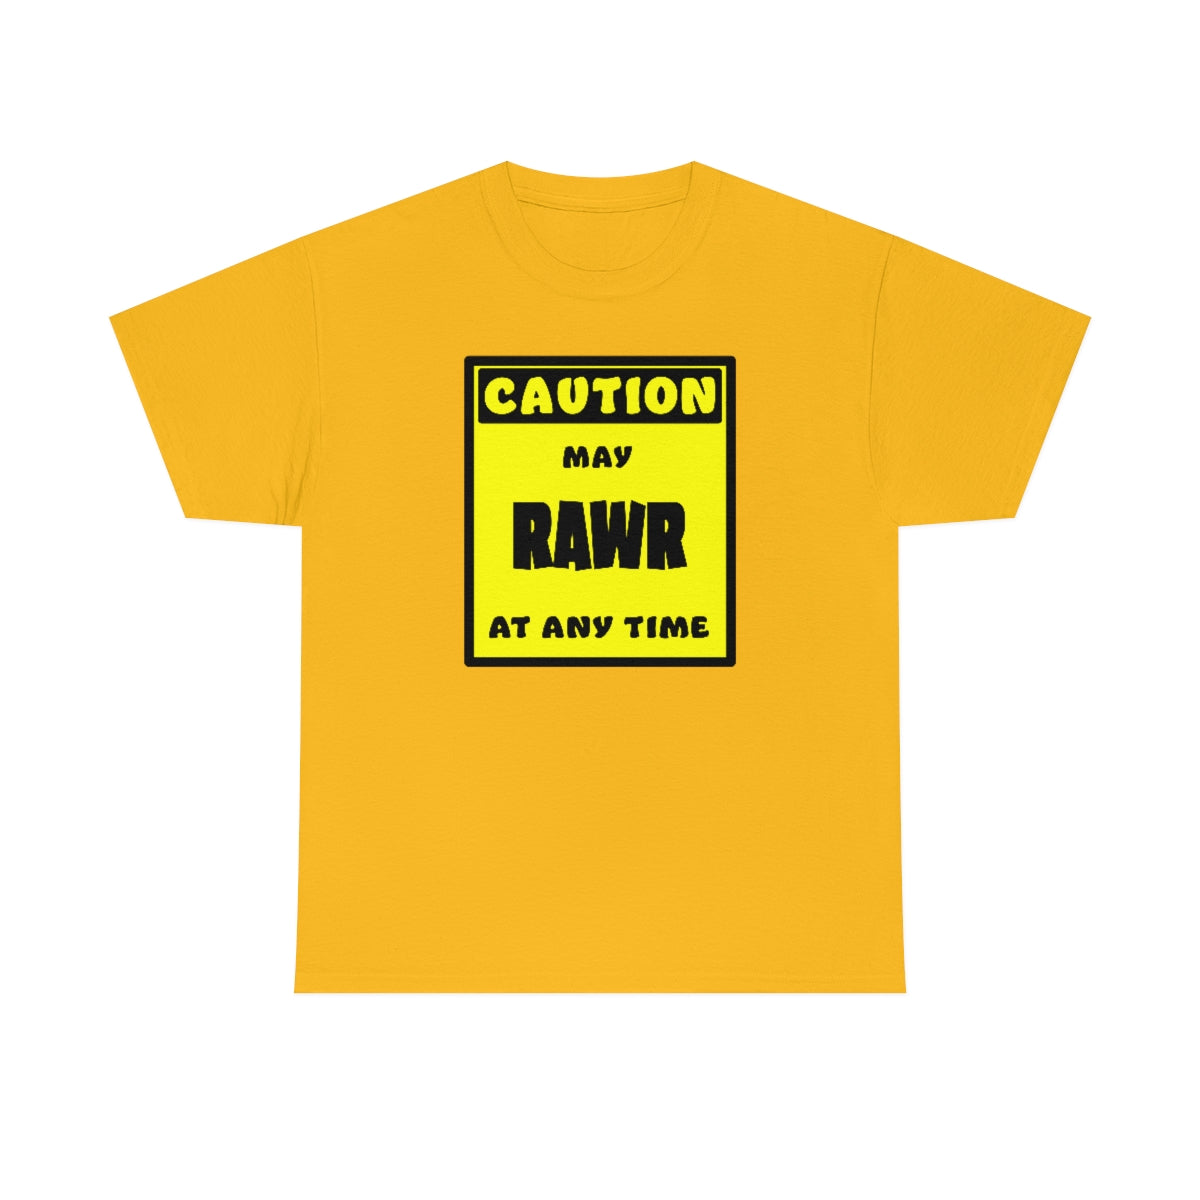 CAUTION! May RAWR at any time! - T-Shirt T-Shirt Artworktee Gold S 